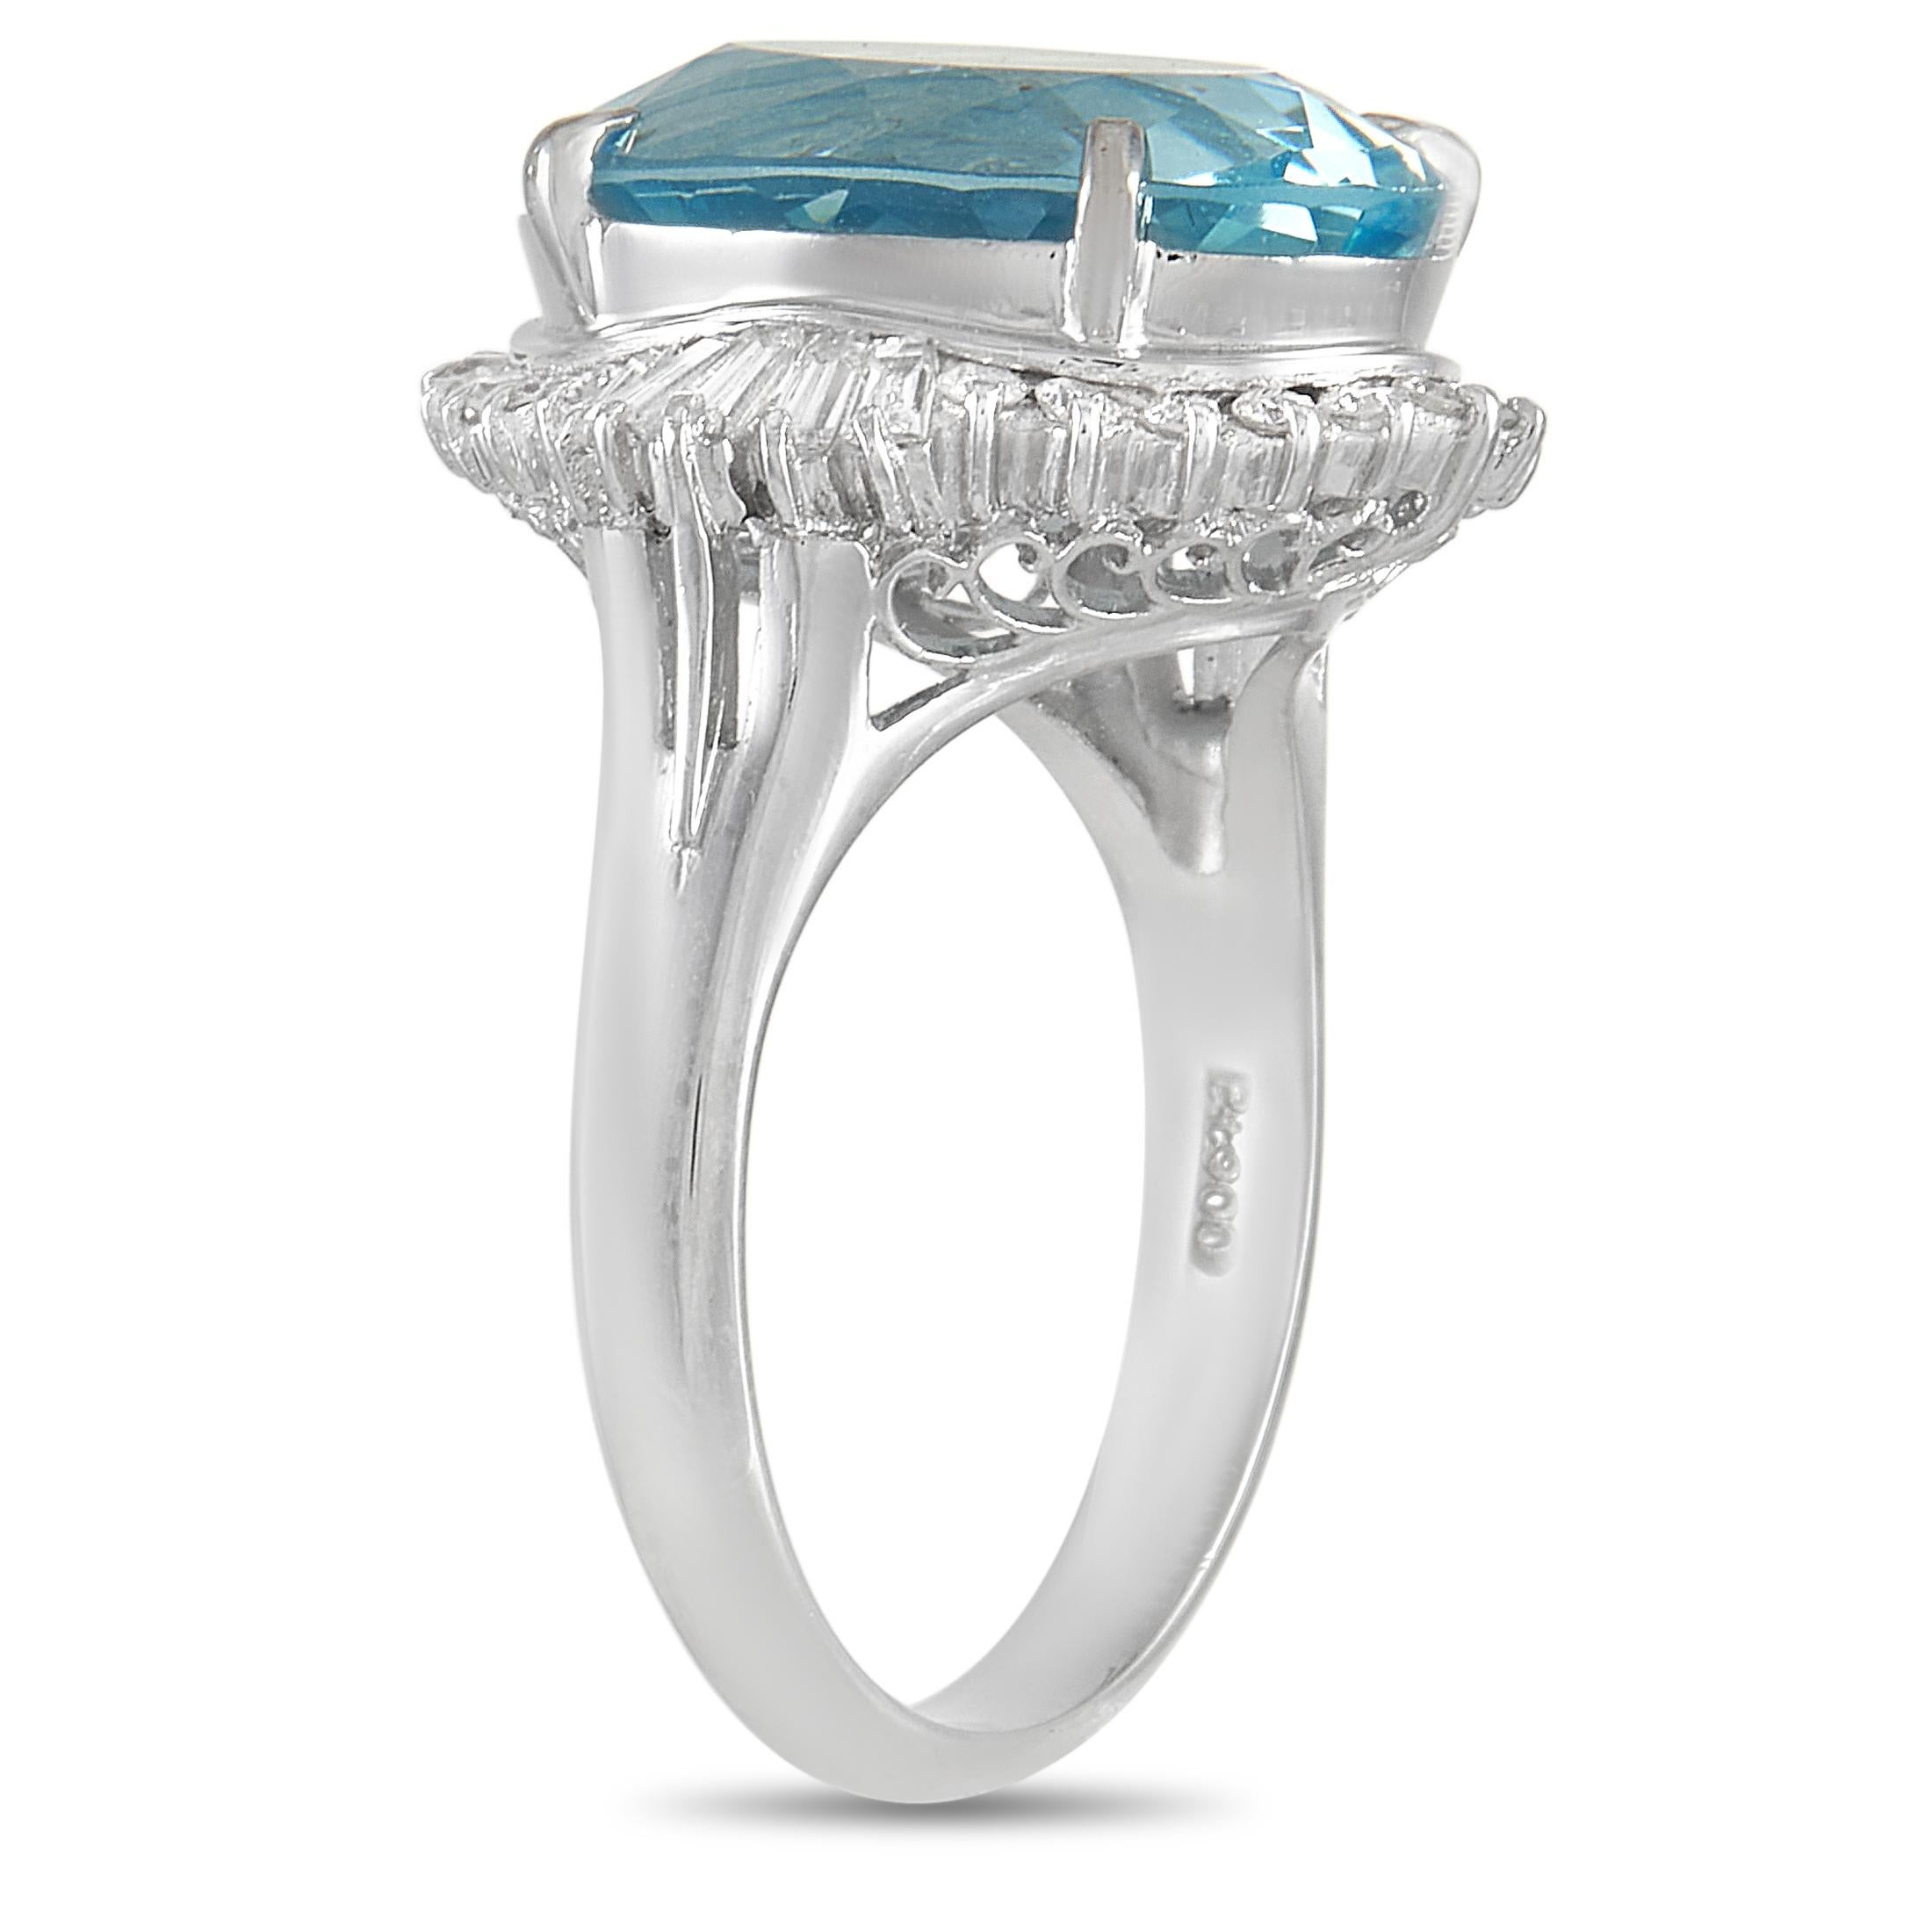 A captivating blue center stone makes this radiant ring simply unforgettable. A shimmering platinum setting adorned with intricate metalwork provides the perfect backdrop for the bright 6.40 carat aquamarine gemstone. A halo of diamonds totaling